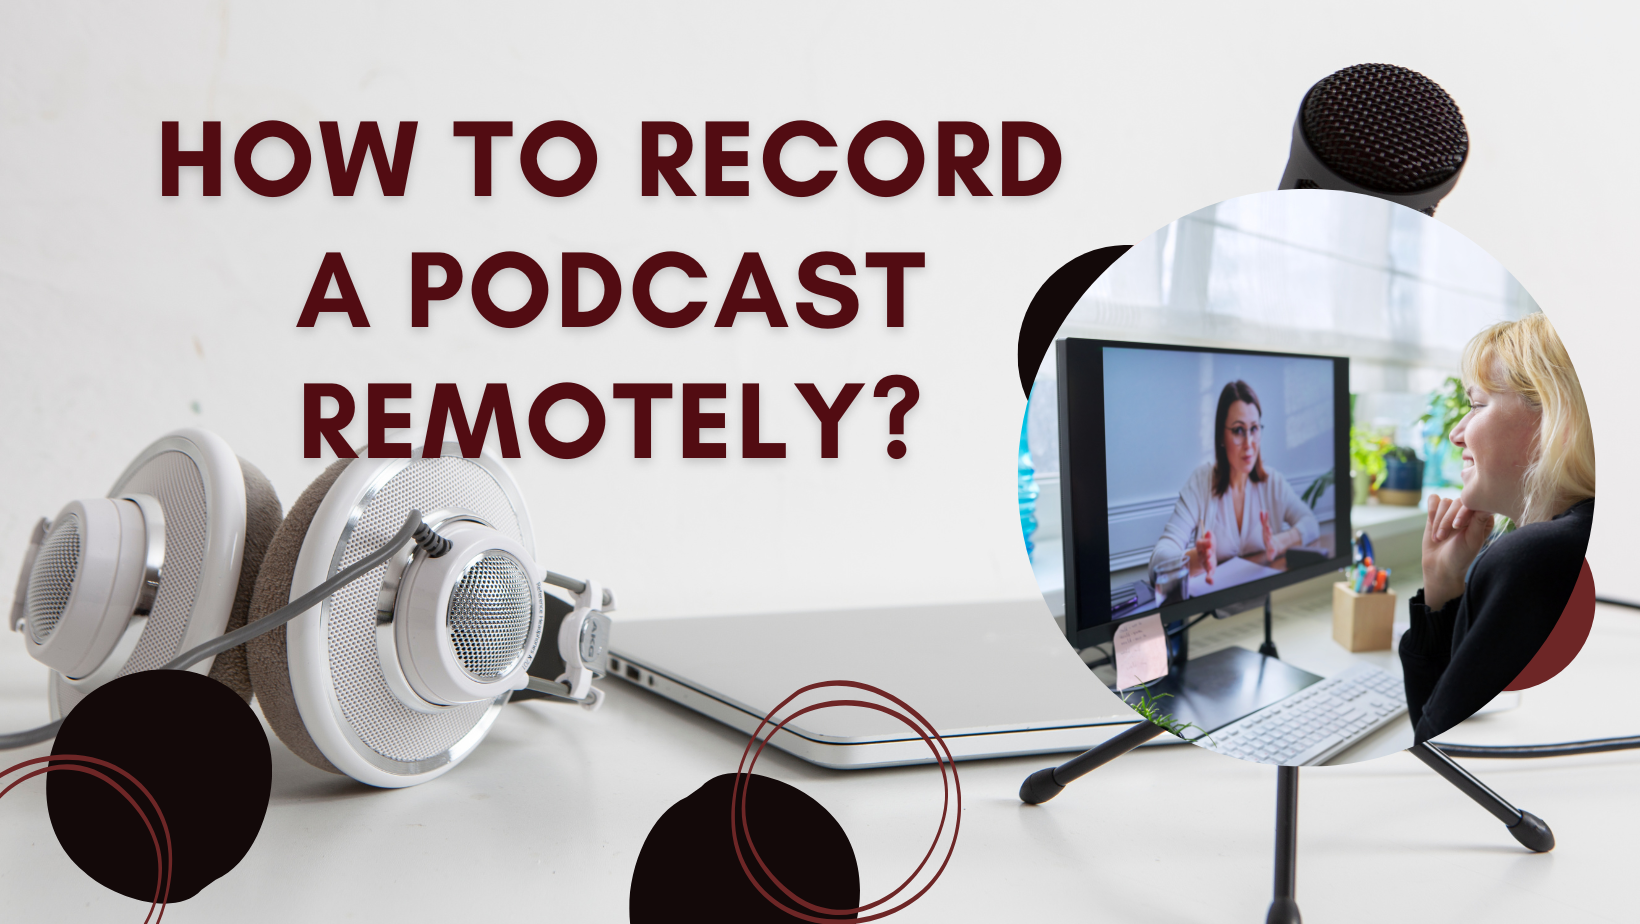 How to record a podcast remotely thumbnail